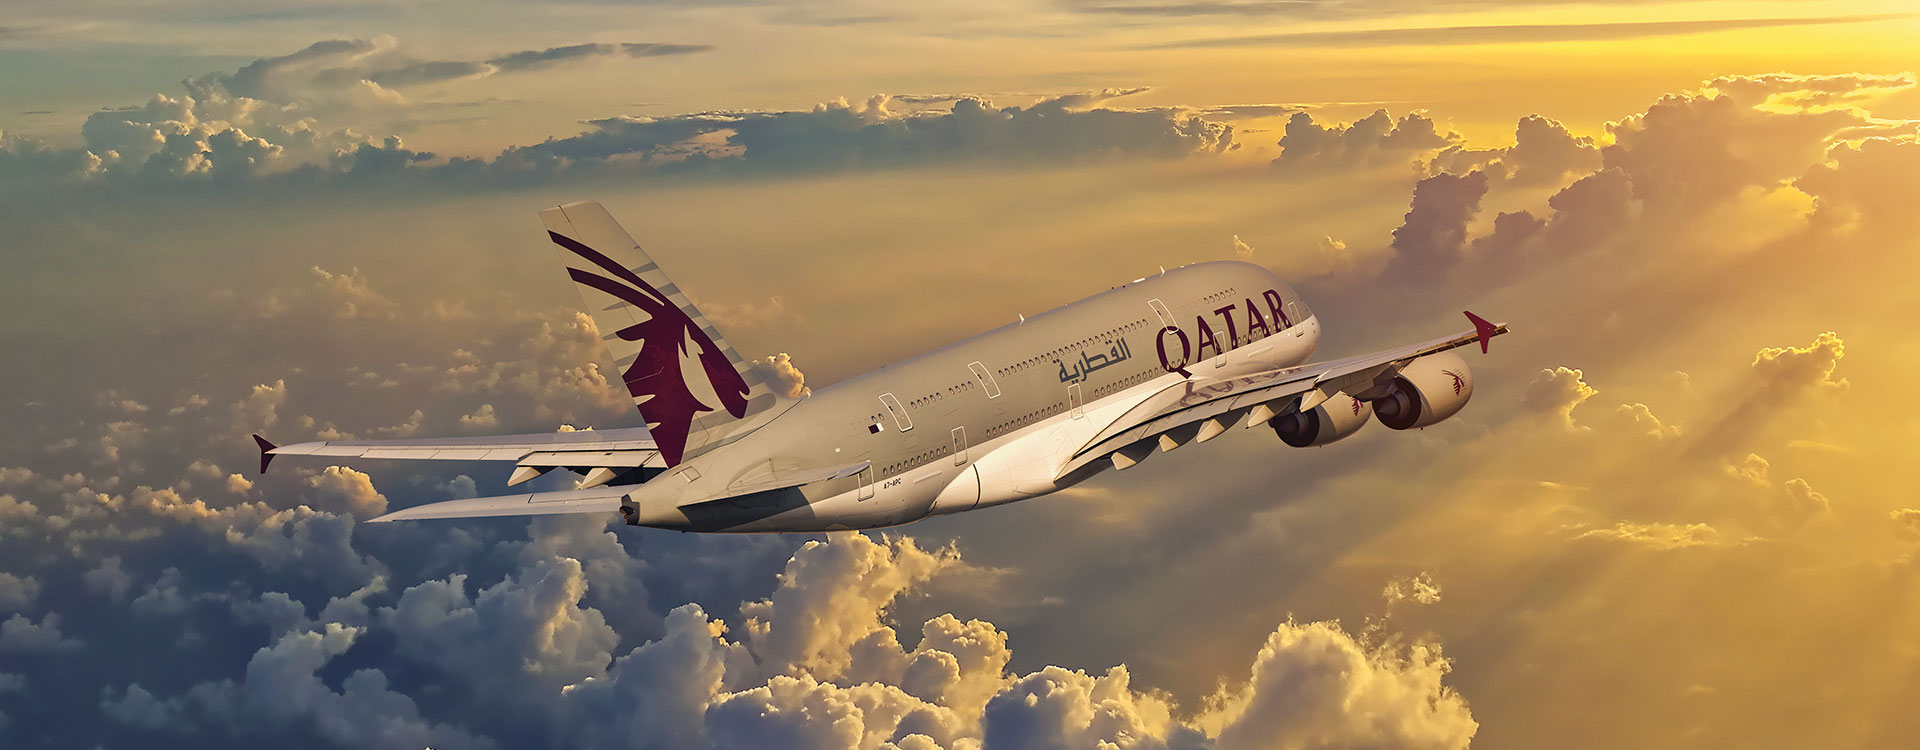 Qatar Airlines Excess Baggage Charges and Policy for 2022